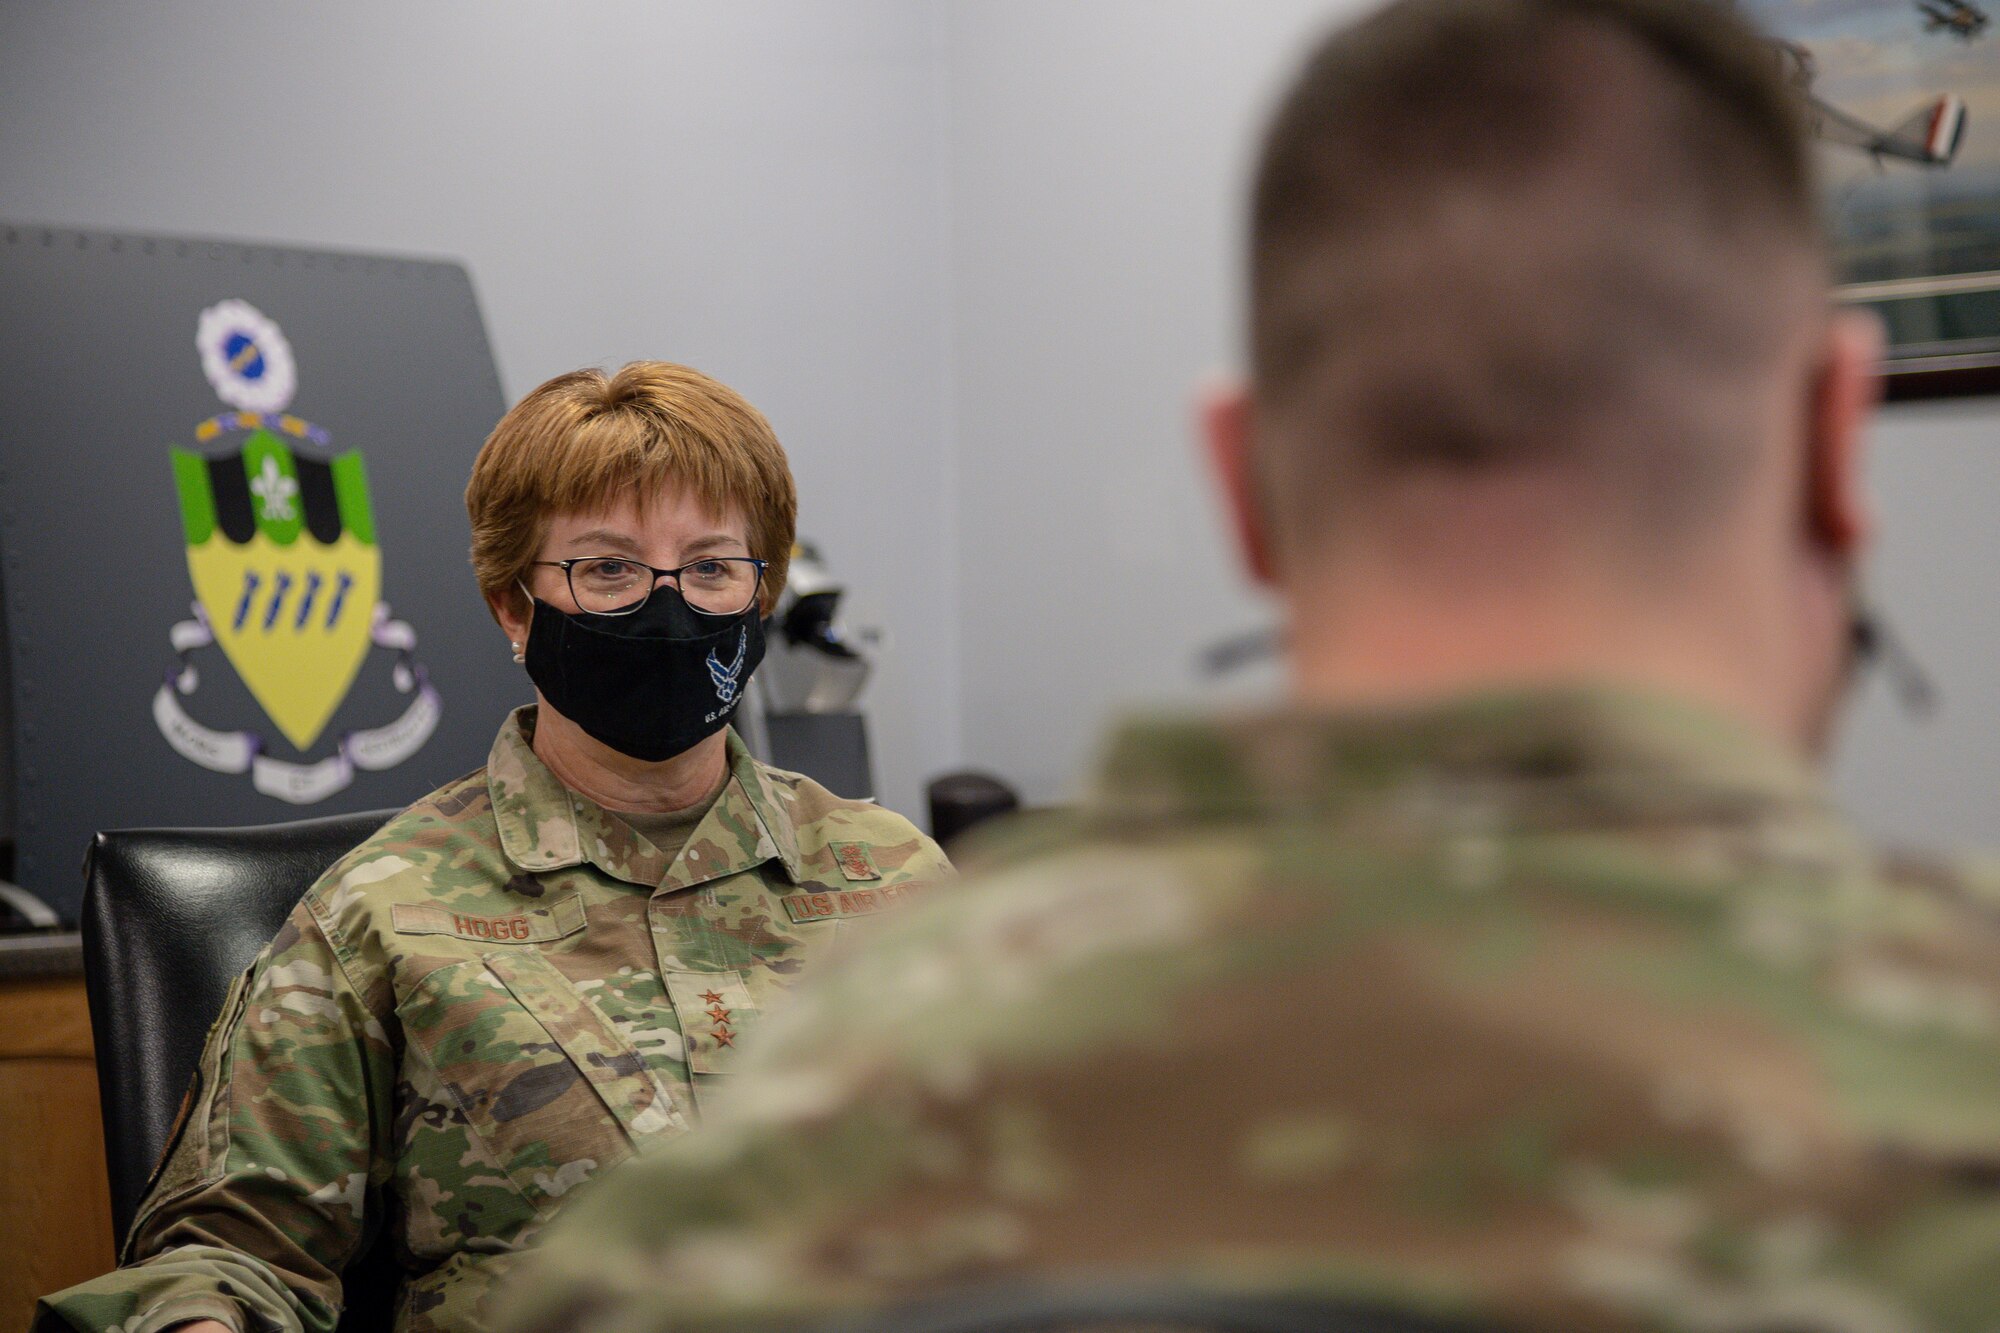 Lt. Gen. Dorothy Hogg, U.S. Air Force surgeon general, speaks with Col. Mark Dmytryszyn, 2nd Bomb Wing commander, before a Barksdale’s Best presentation at Barksdale Air Force Base, Louisiana, March 10, 2021.